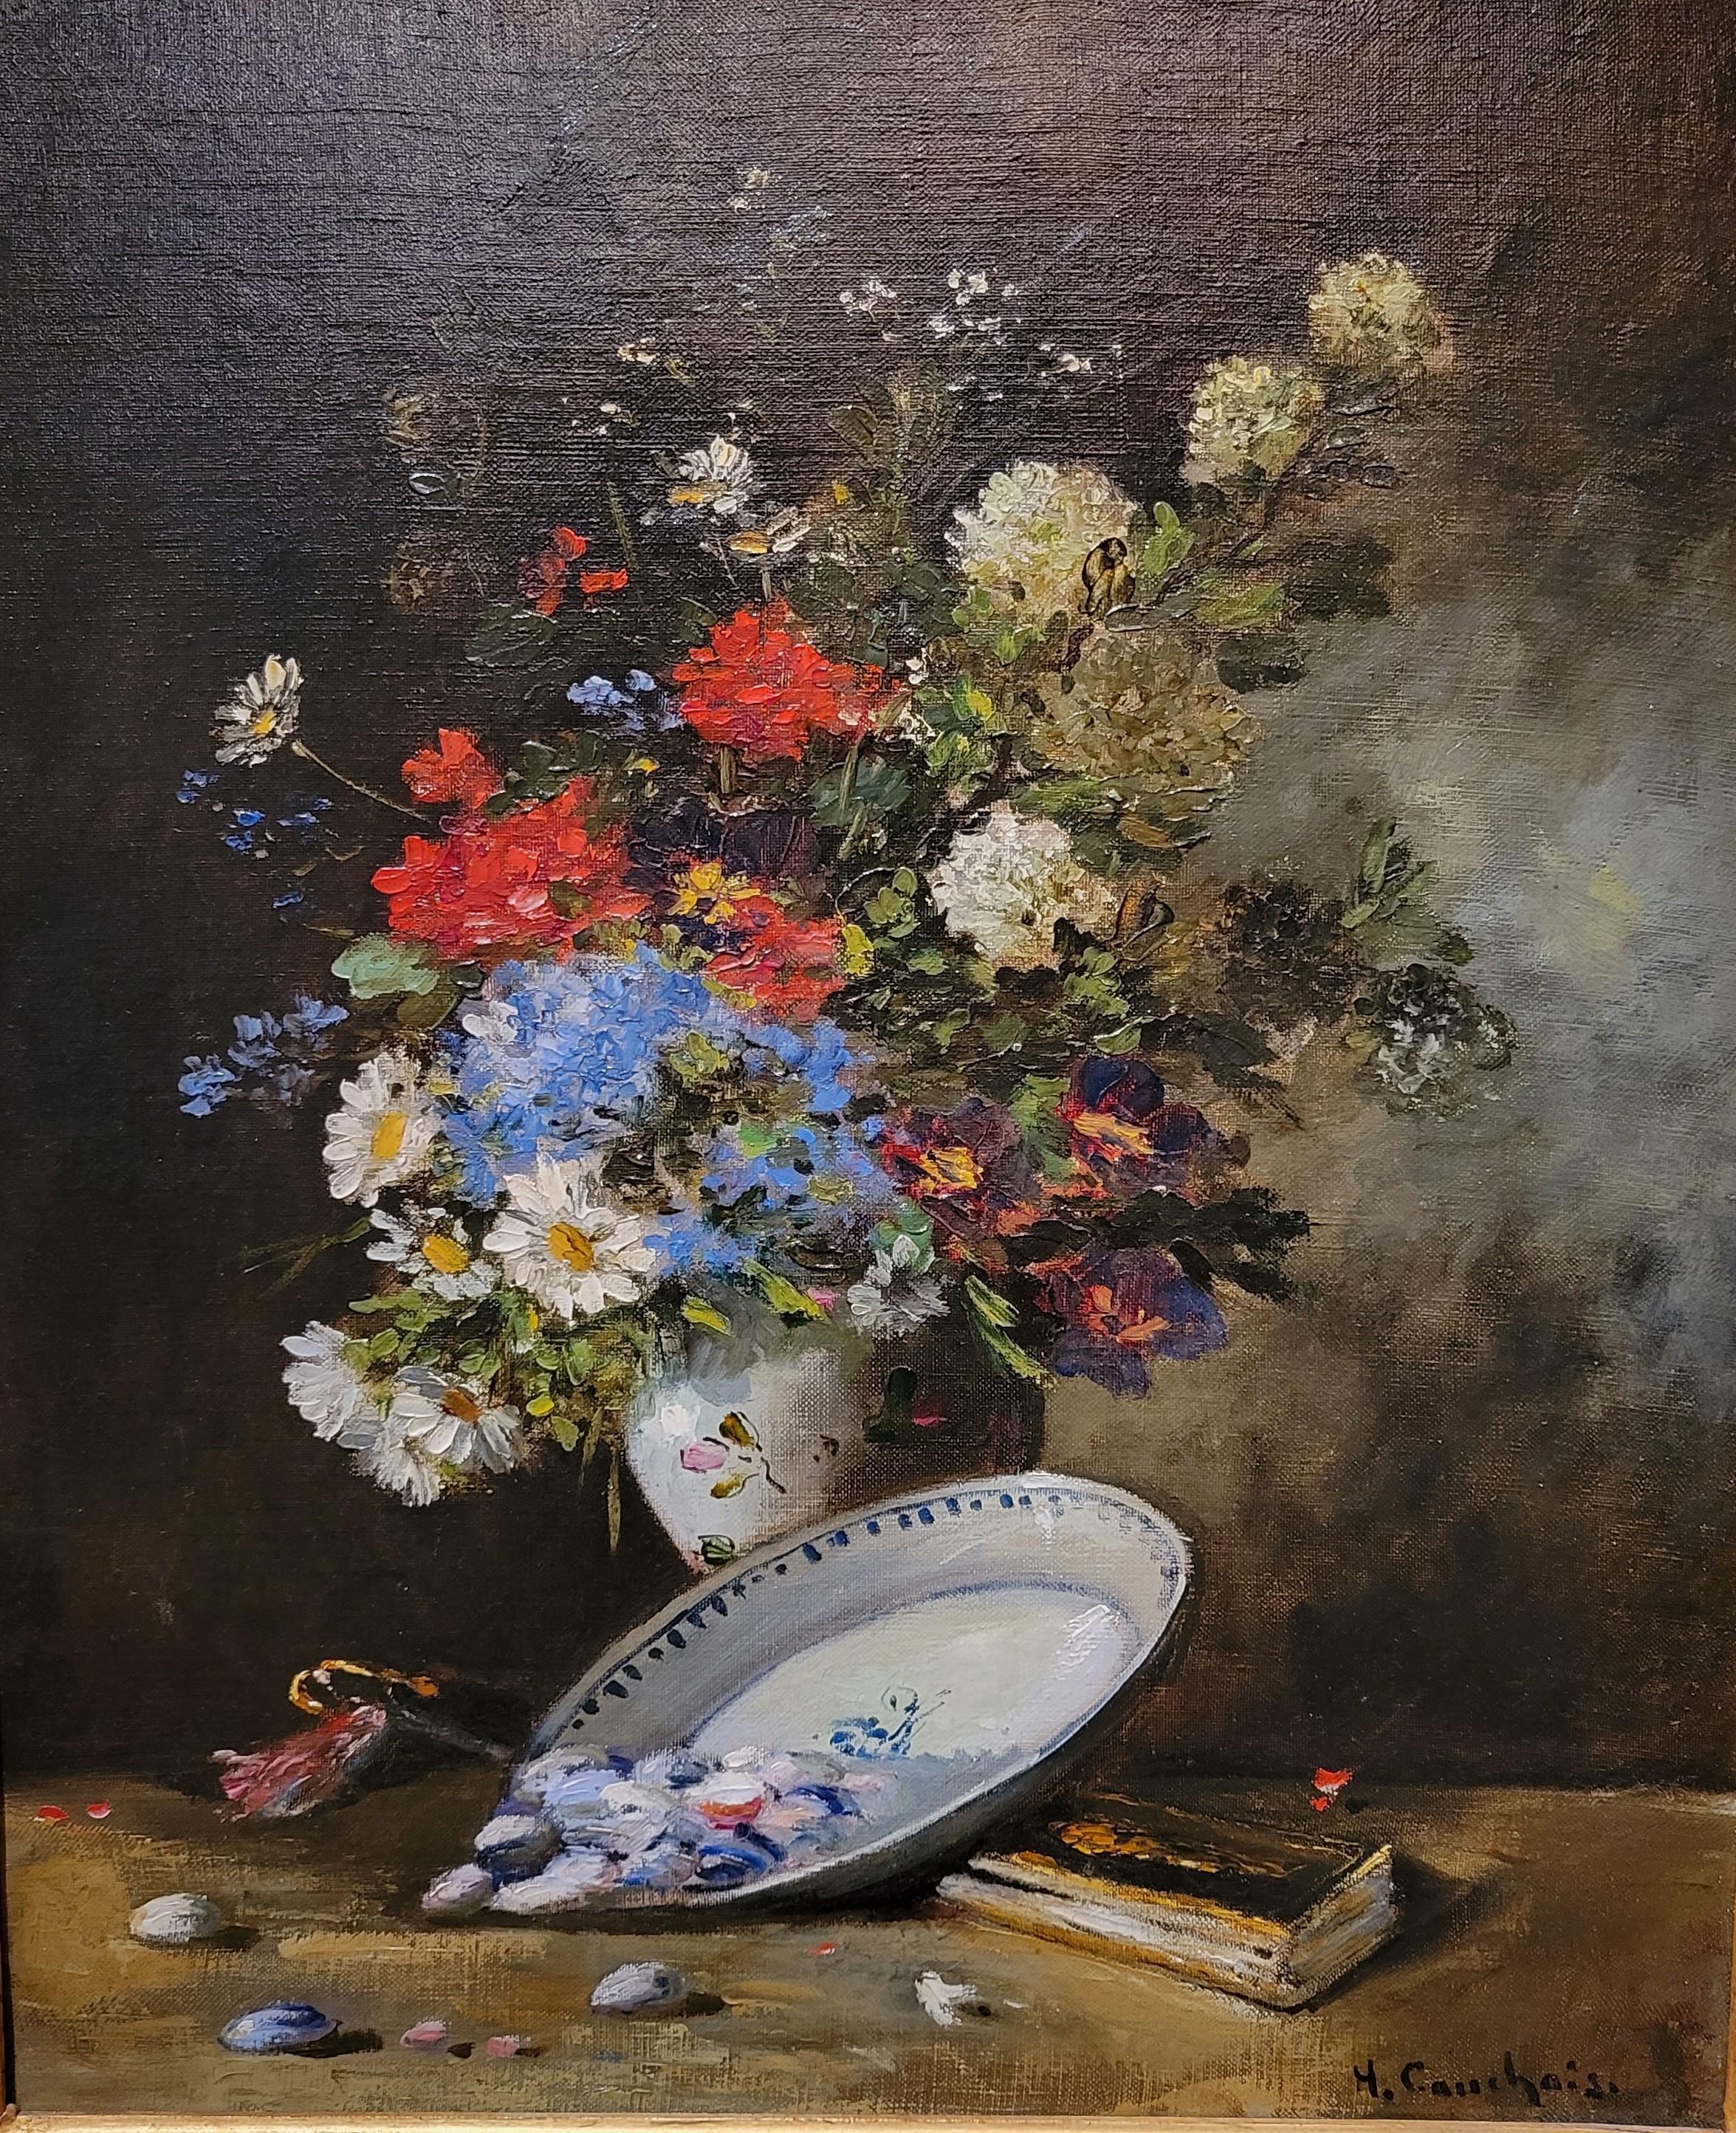 Cauchois is a well-known and collected French artist of the period. This is a lovely floral still-life.